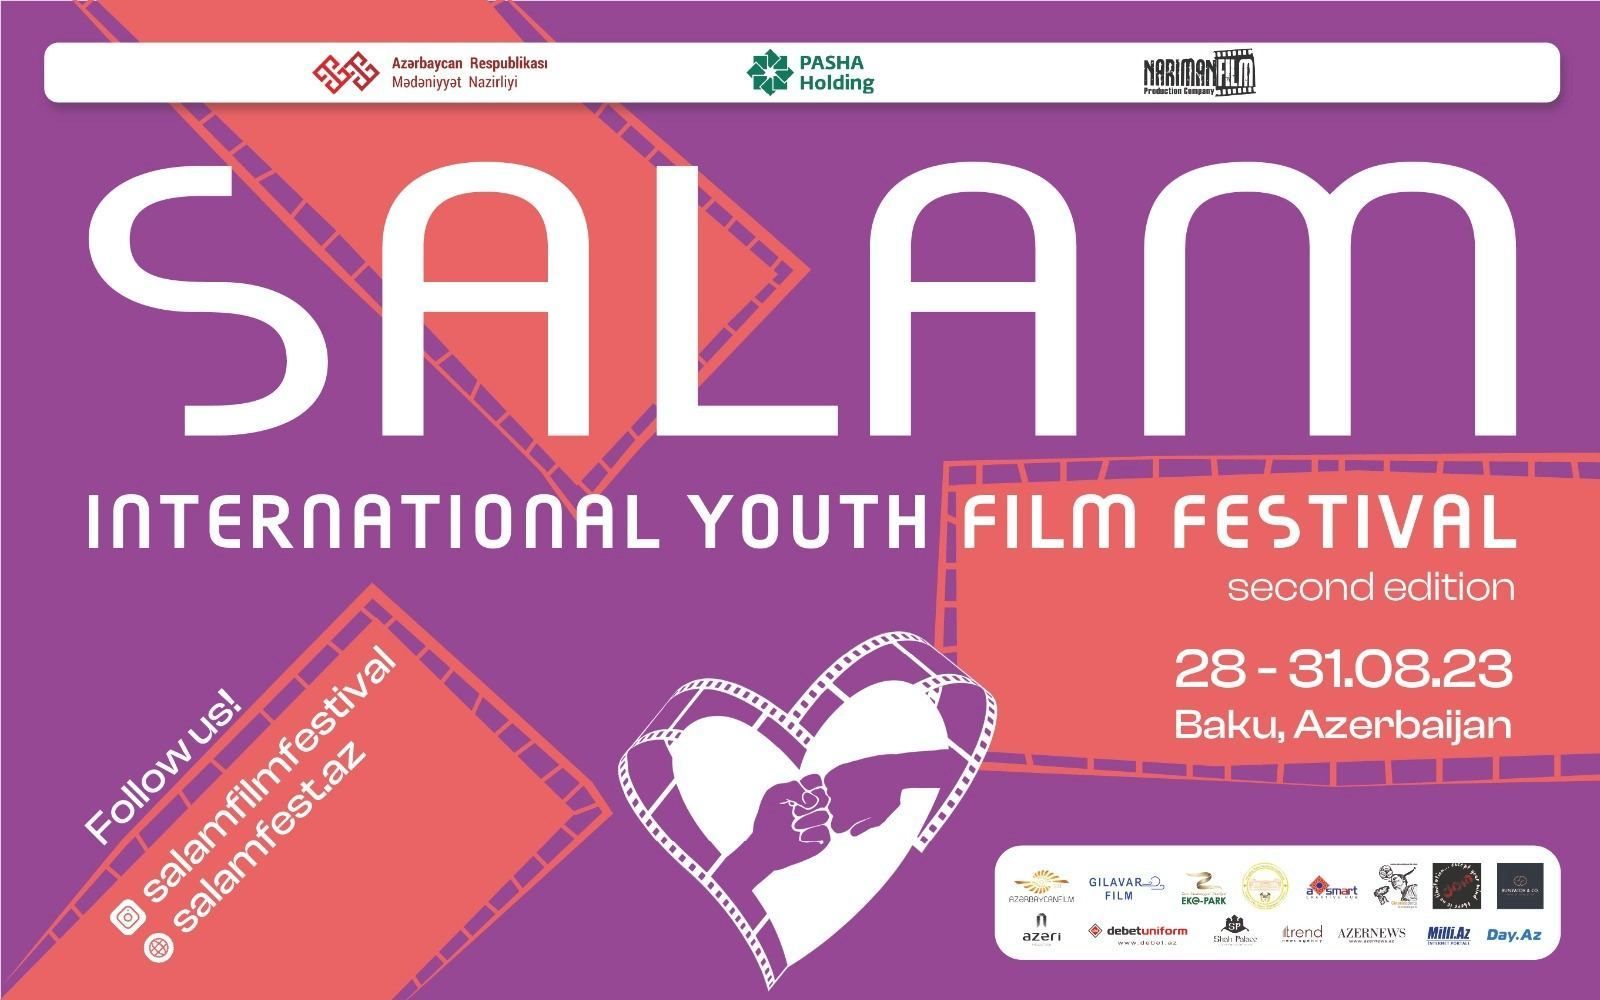 Young talents learn how to make films at SALAM Int'l Youth Film Festival [PHOTOS] - Gallery Image